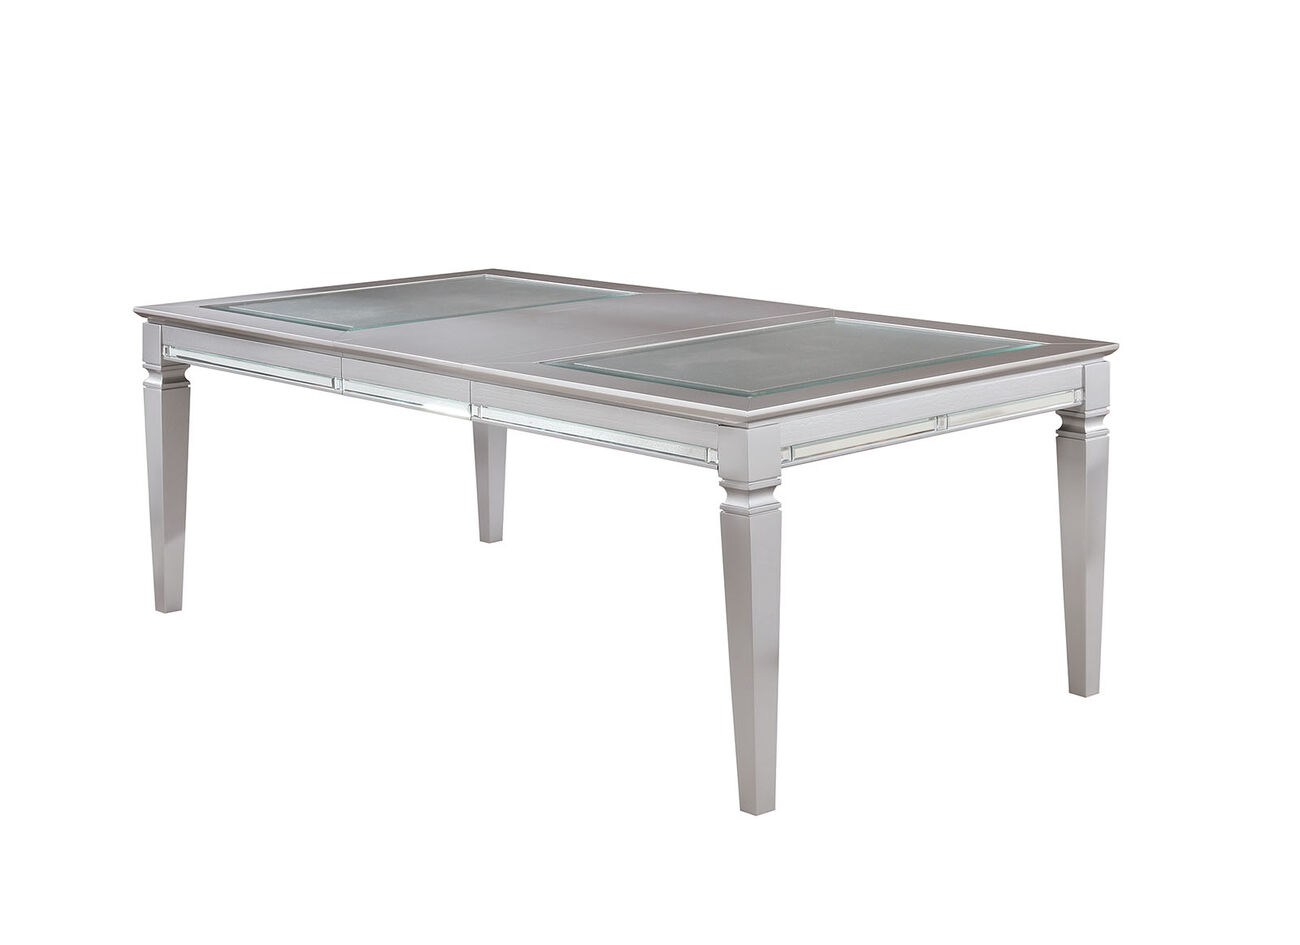 Wooden Dining Table With Beveled Mirror Insert, Silver and Clear